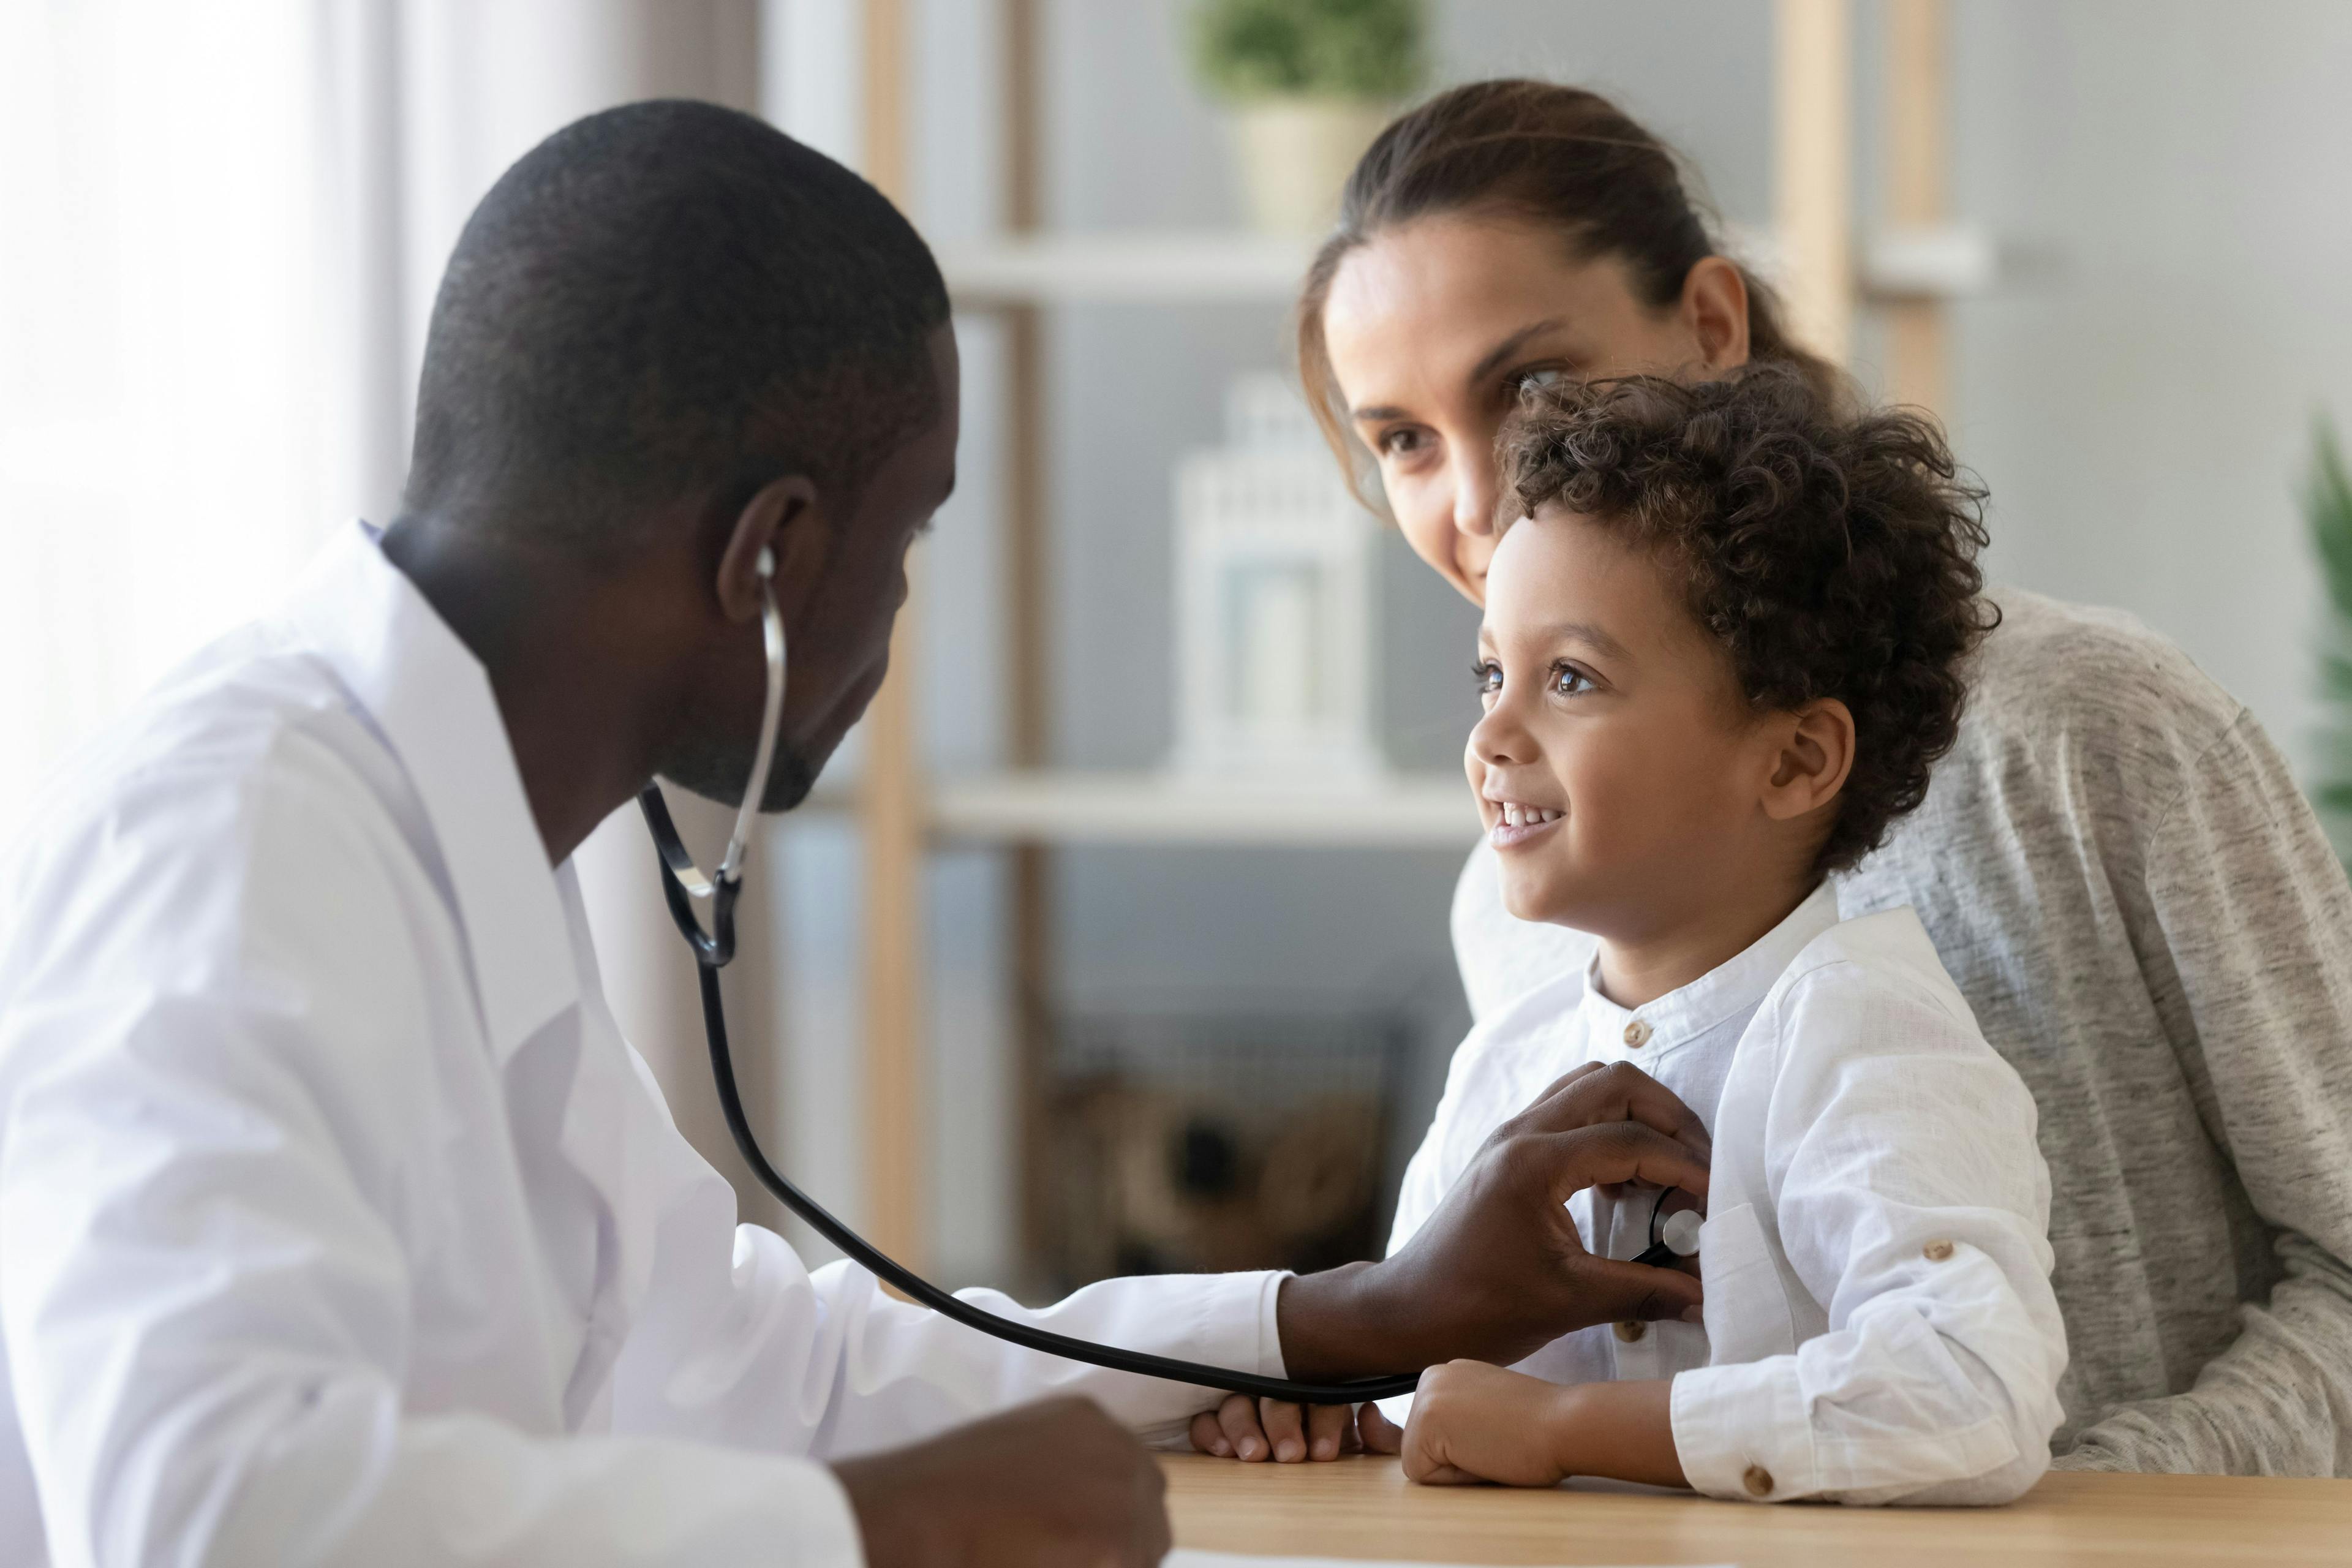 African American pediatrician listening to child lung and heart sound | Image Credit: fizkes - stock.adobe.com